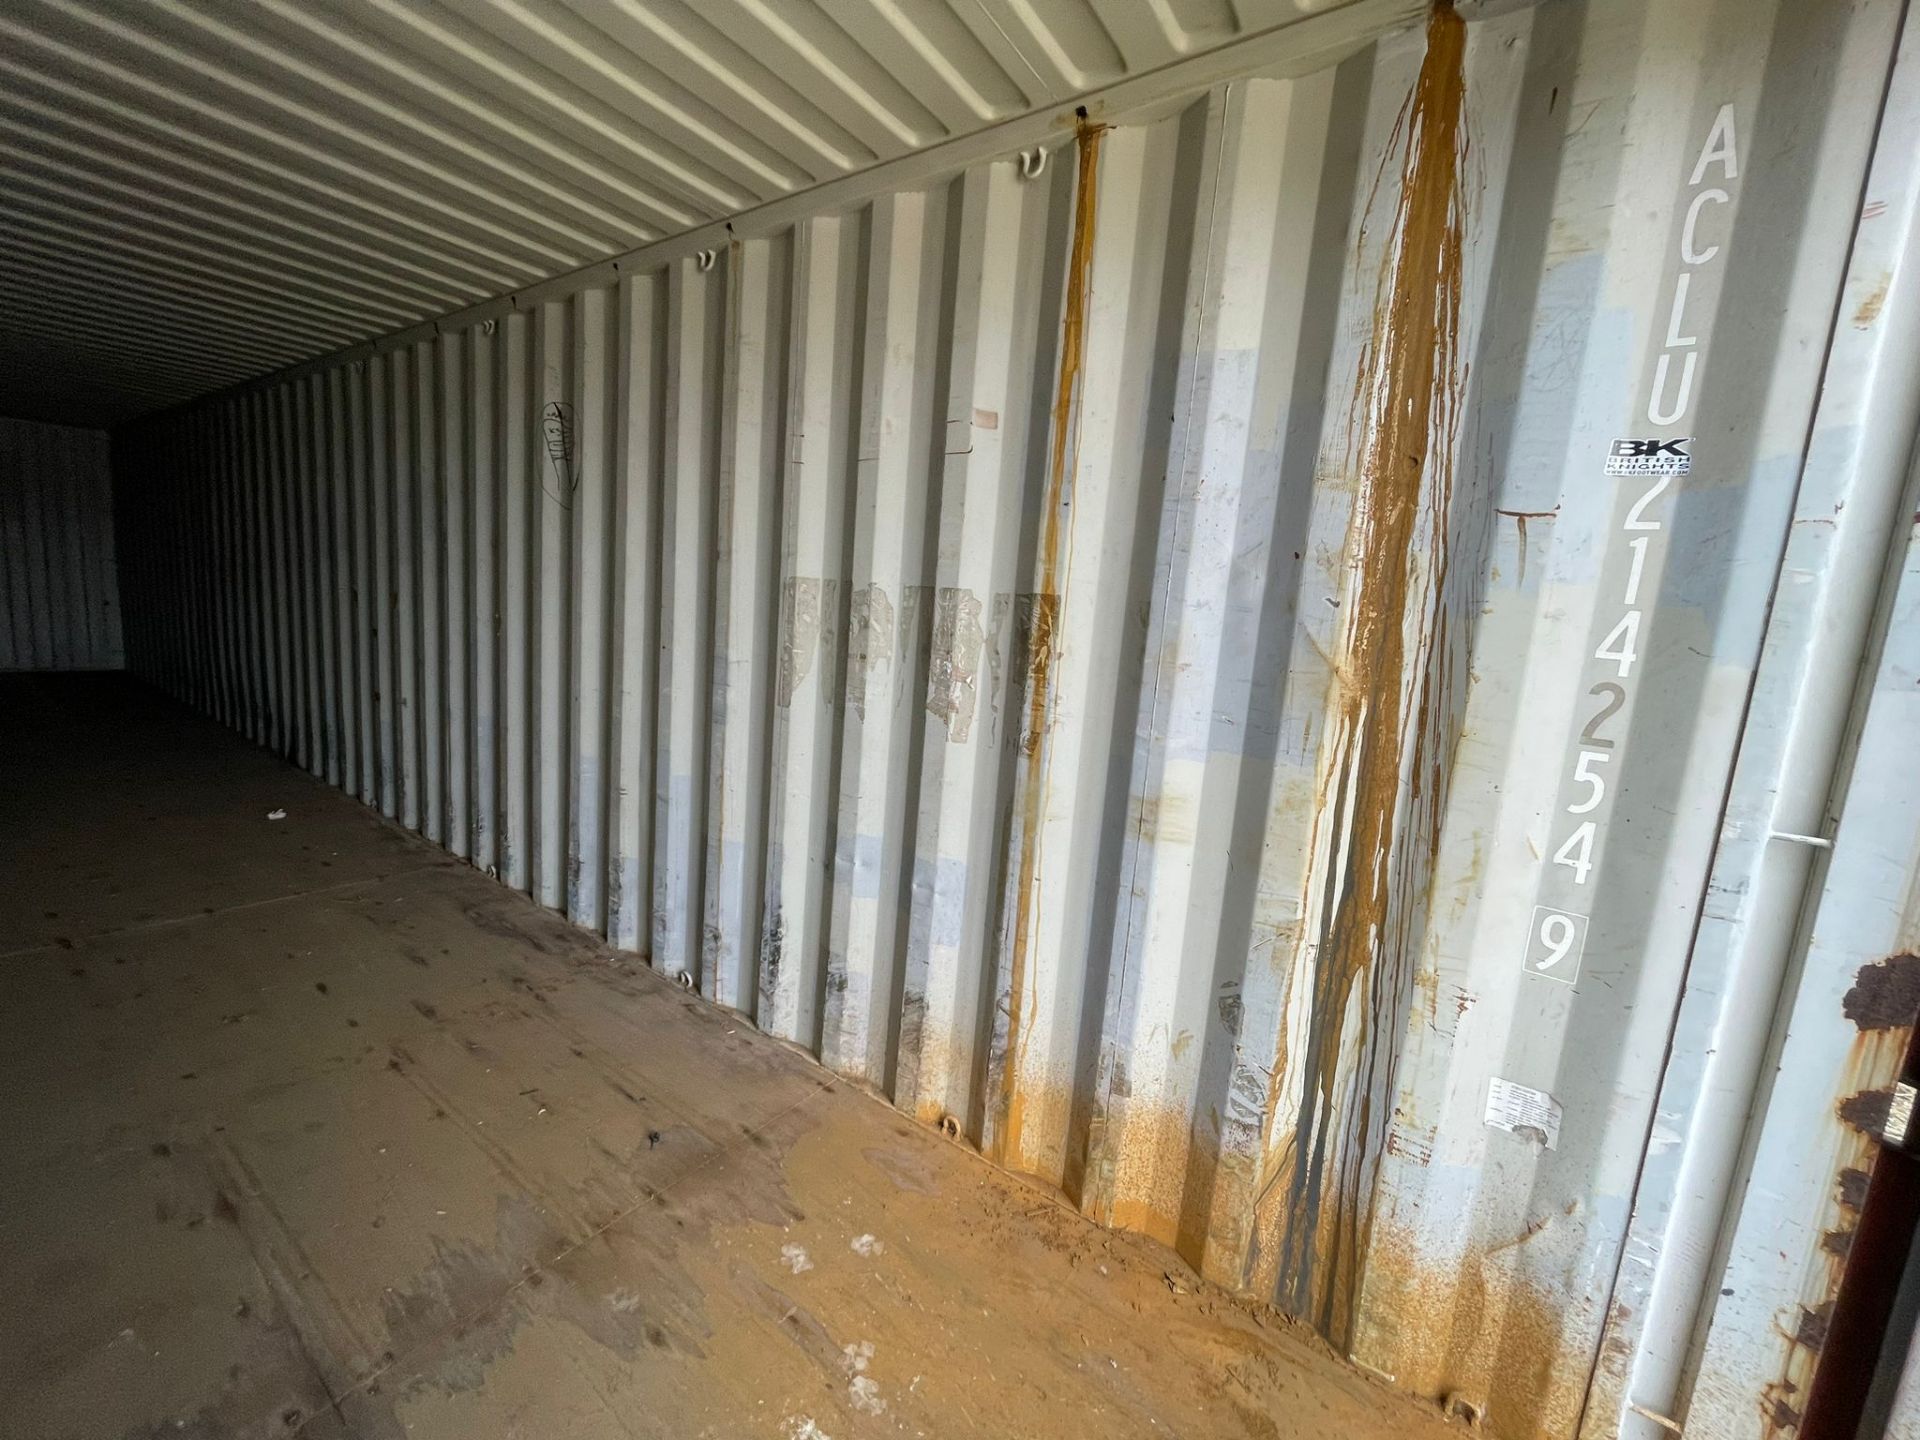 Shipping Container - ref ACLU2142549 - NO RESERVE (40’ GP - Standard) - Image 2 of 4